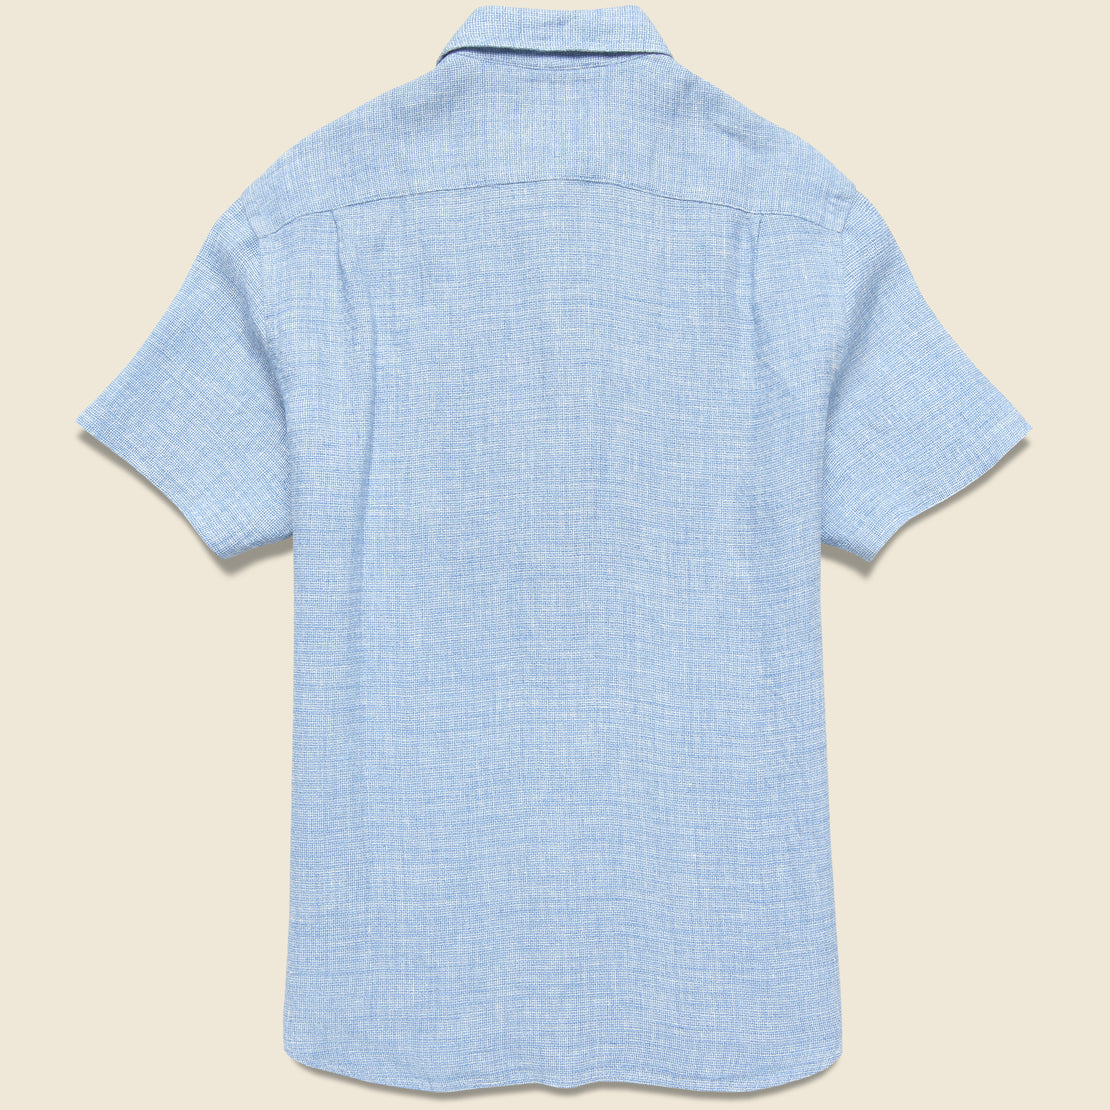 Palma Linen Shirt - Blue Basketweave - Faherty - STAG Provisions - Tops - S/S Woven - Solid